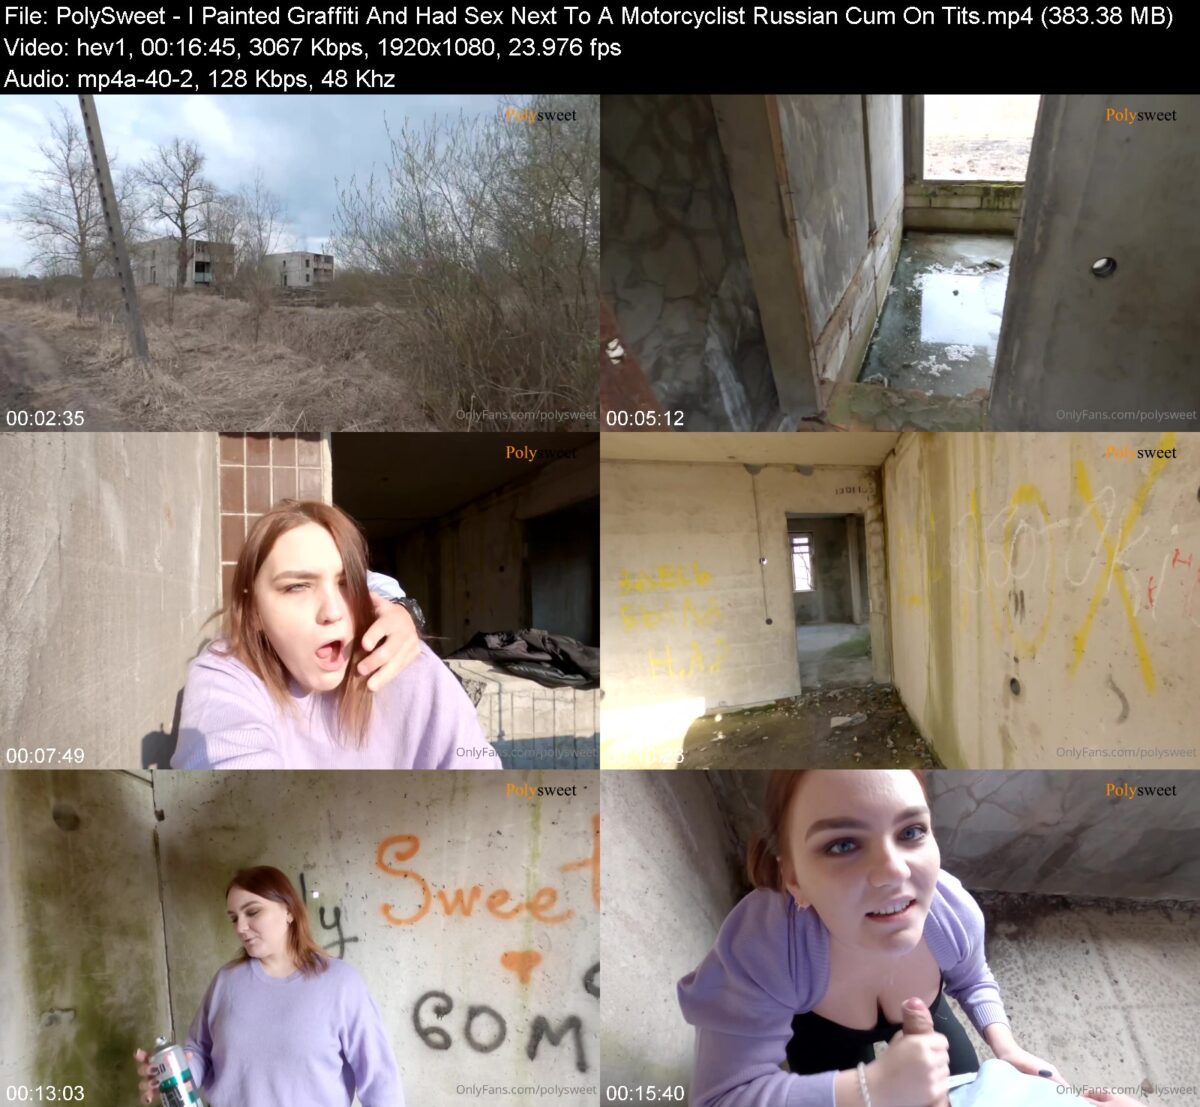 Actress: PolySweet. Title and Studio: I Painted Graffiti And Had Sex Next To A Motorcyclist Russian Cum On Tits